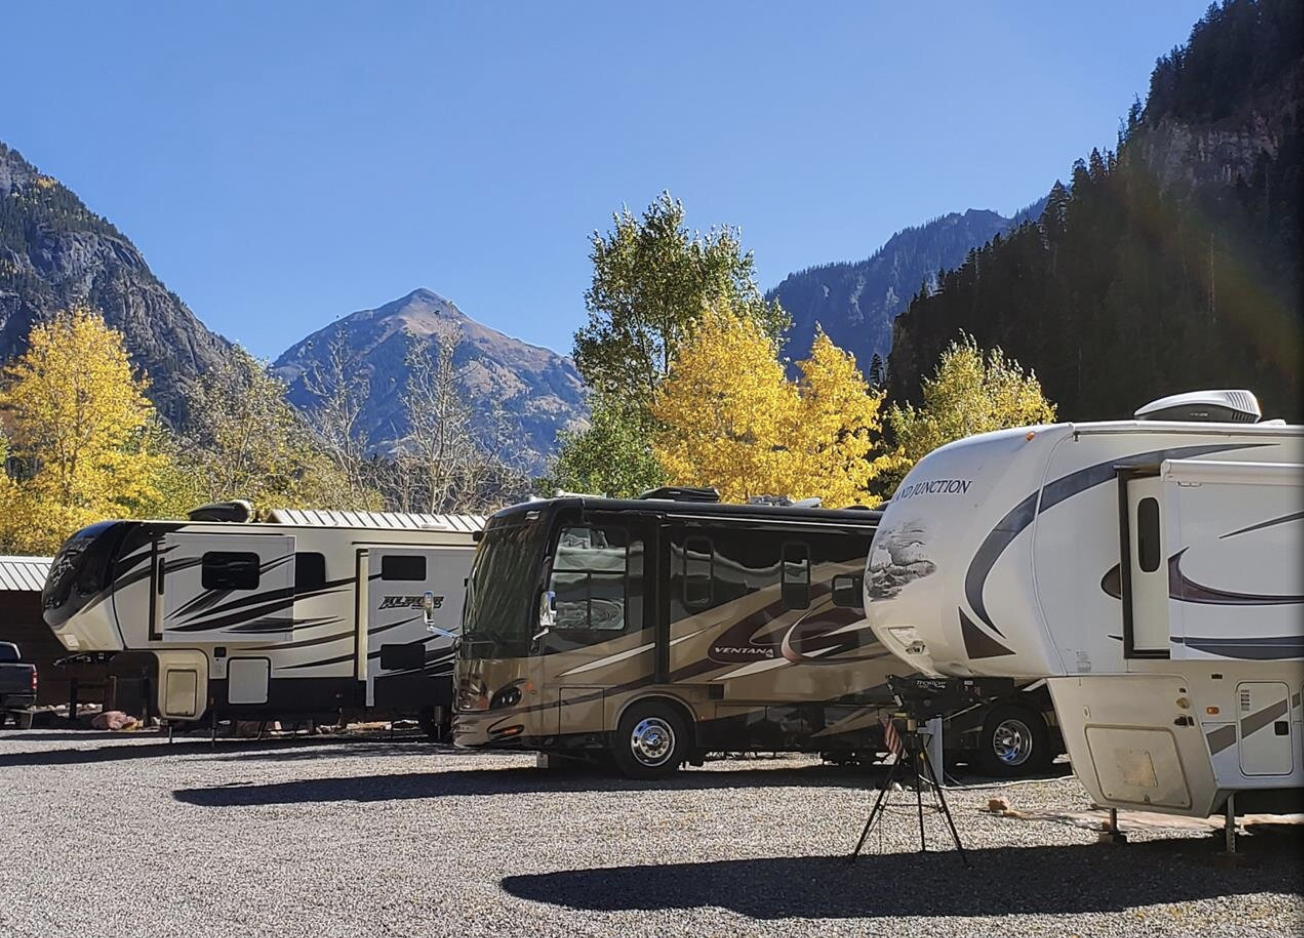 RV campers with mountains